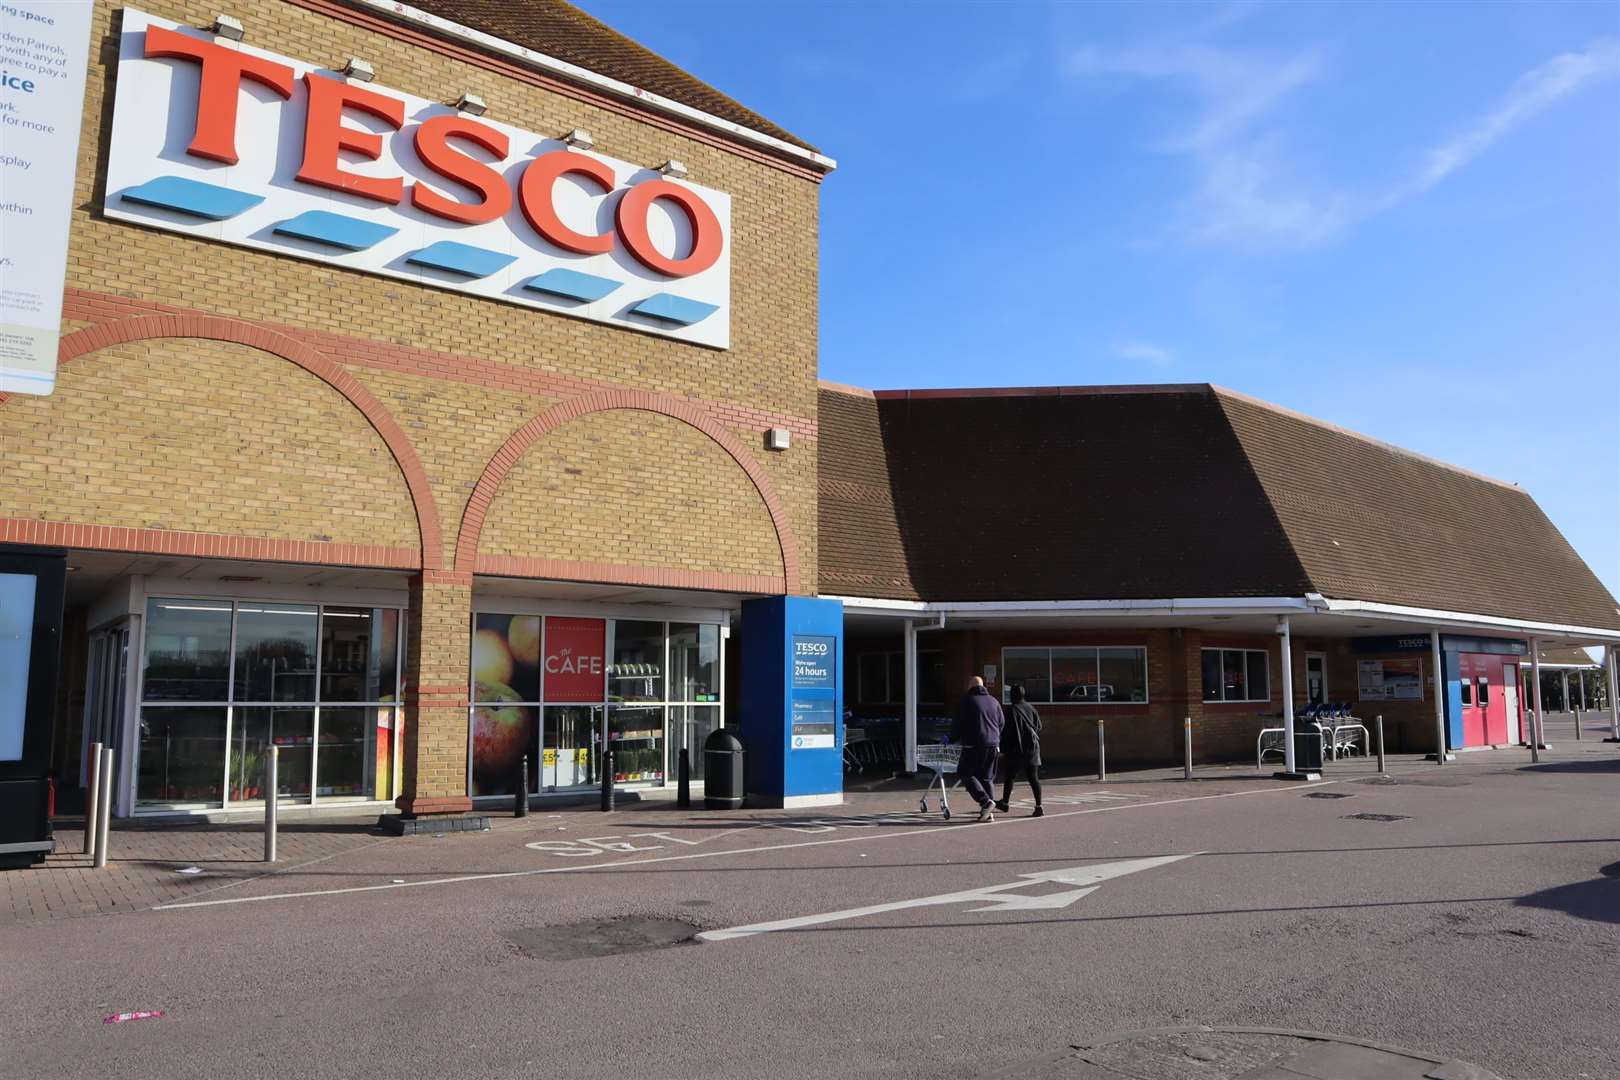 Tesco is recalling a pork product